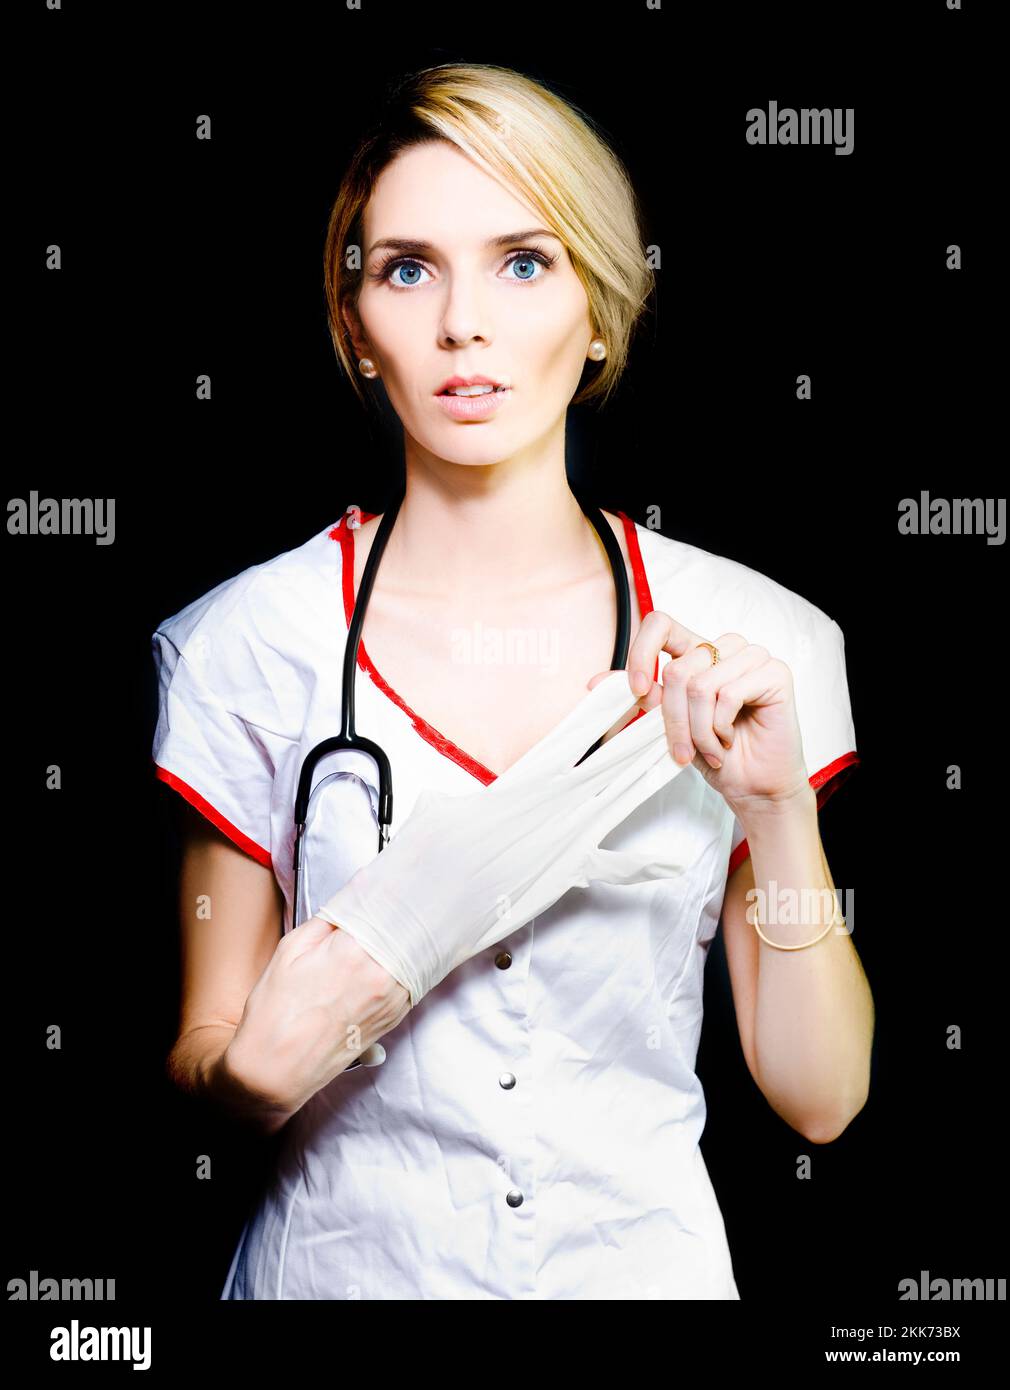 Serious young nurse with short blonde hair removing her latex gloves after doing blood work on a patient Stock Photo